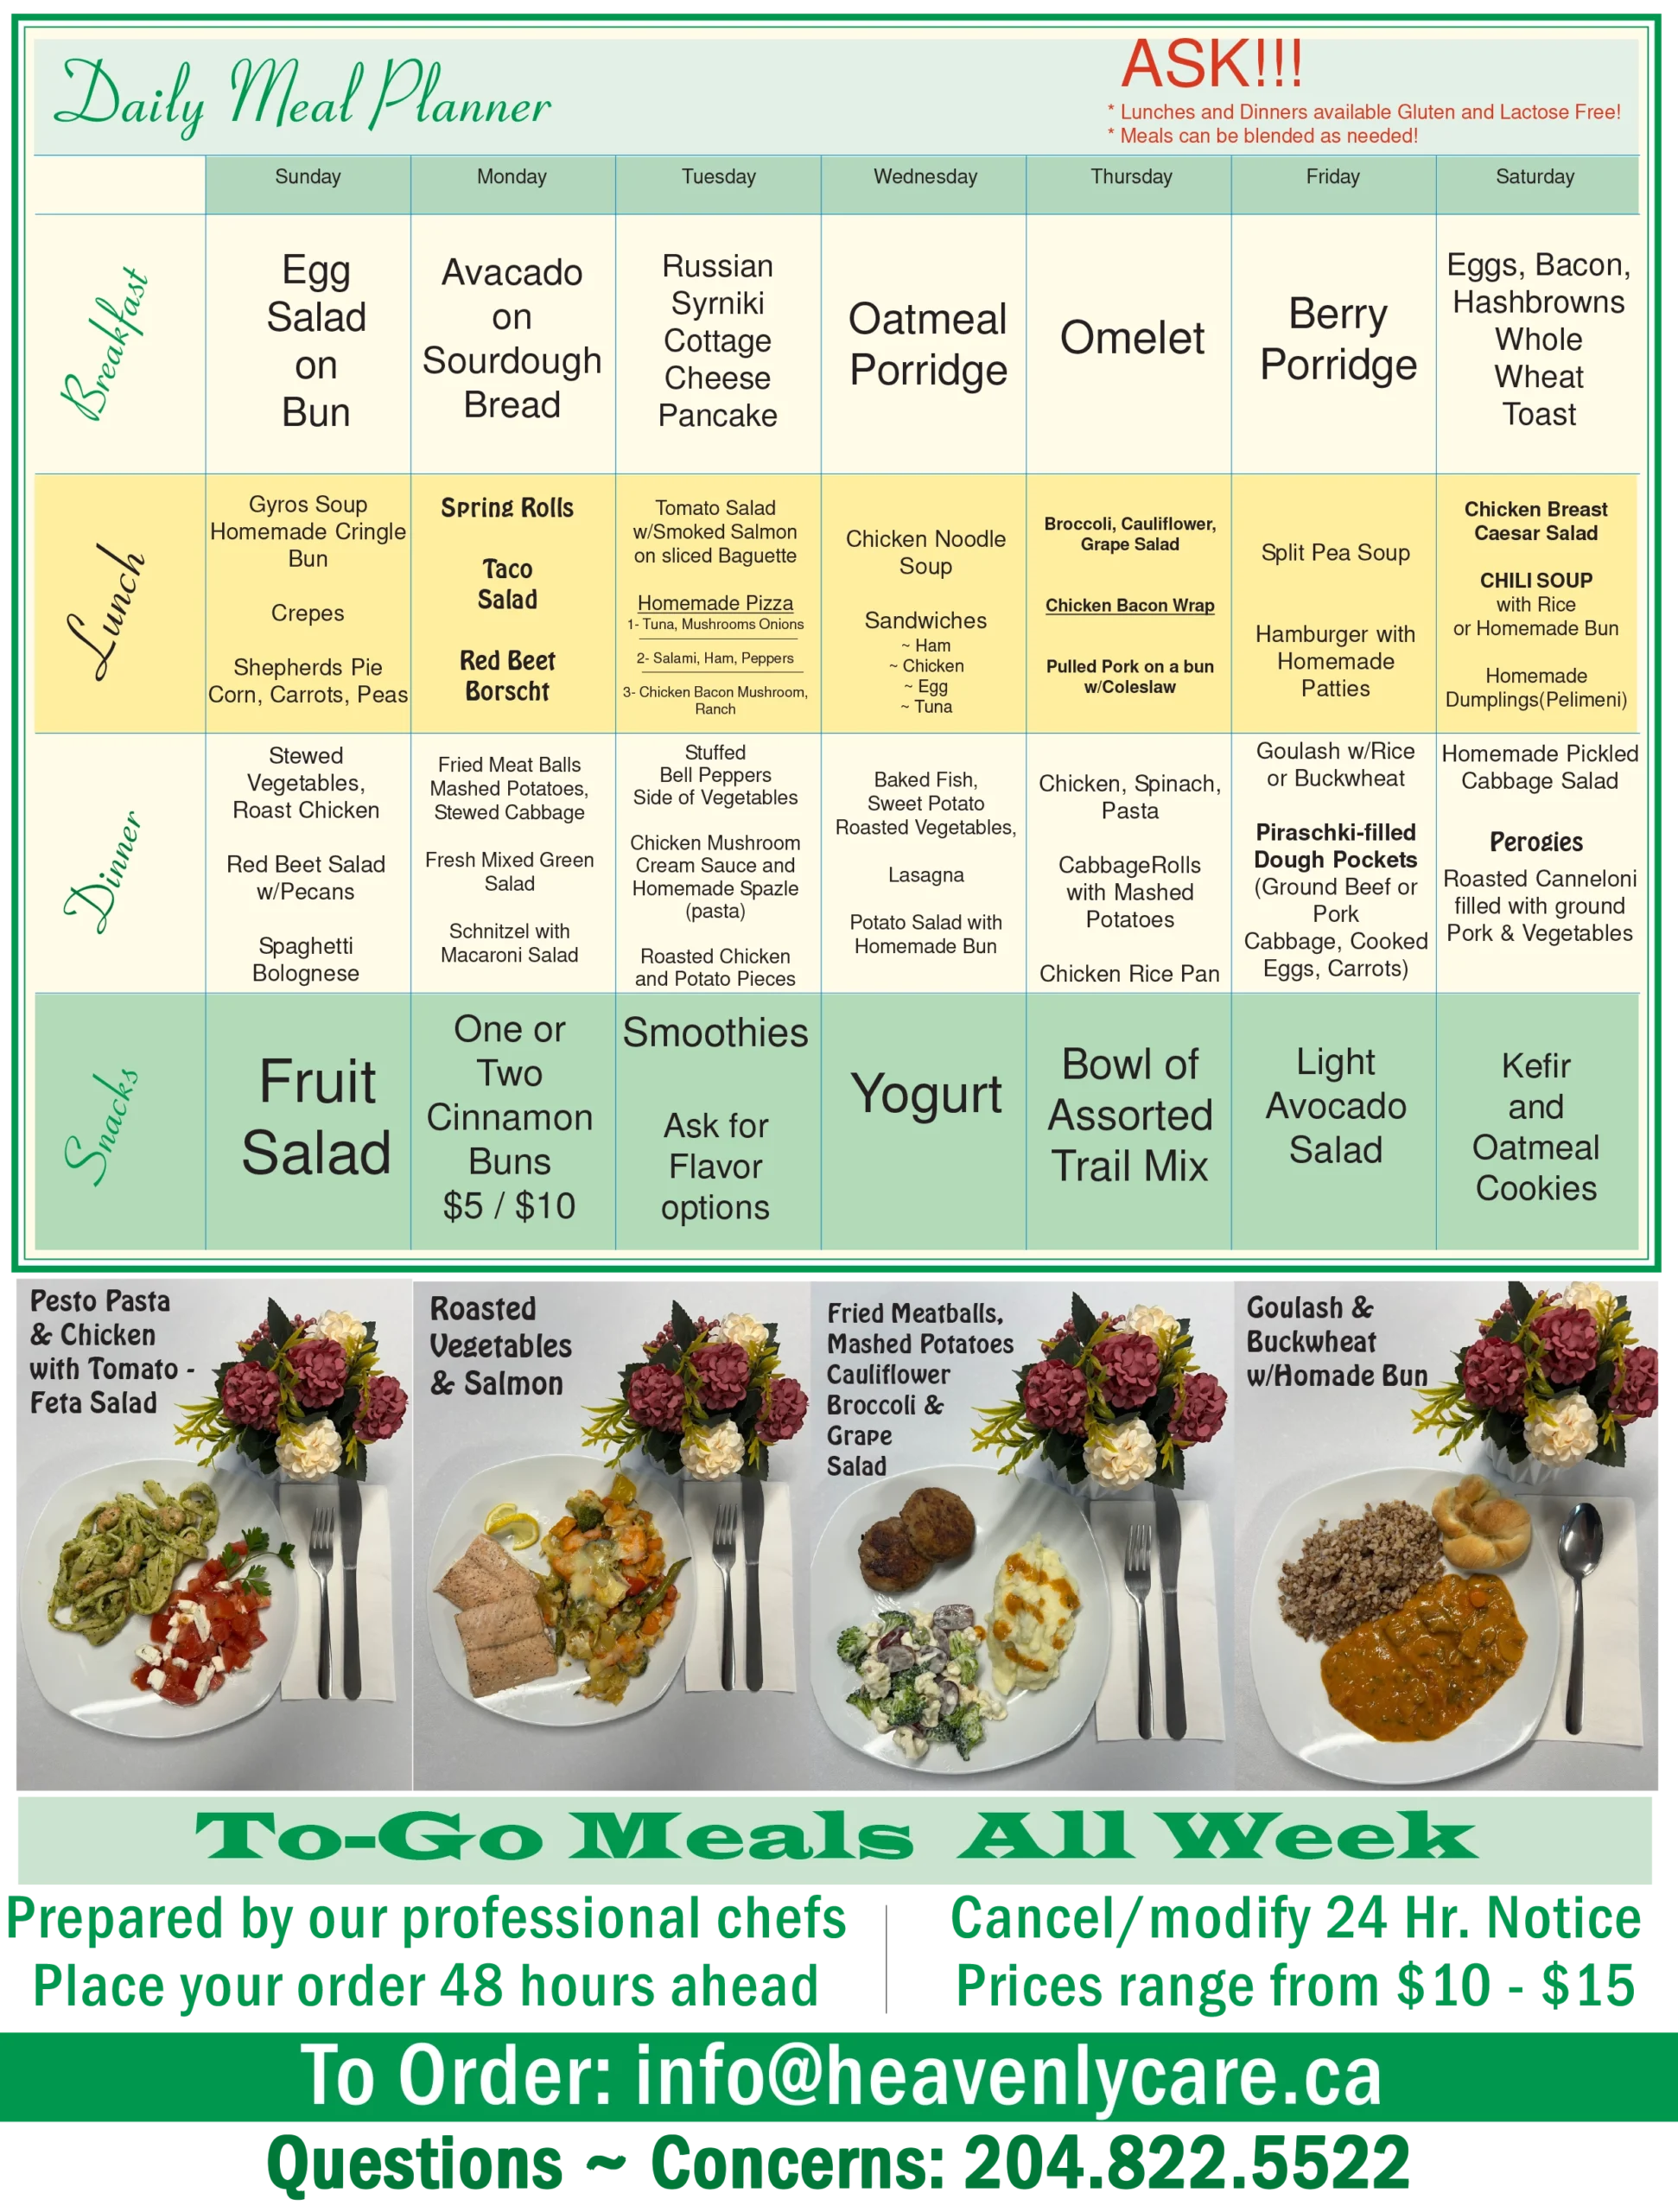 Daily Meal Planner 2